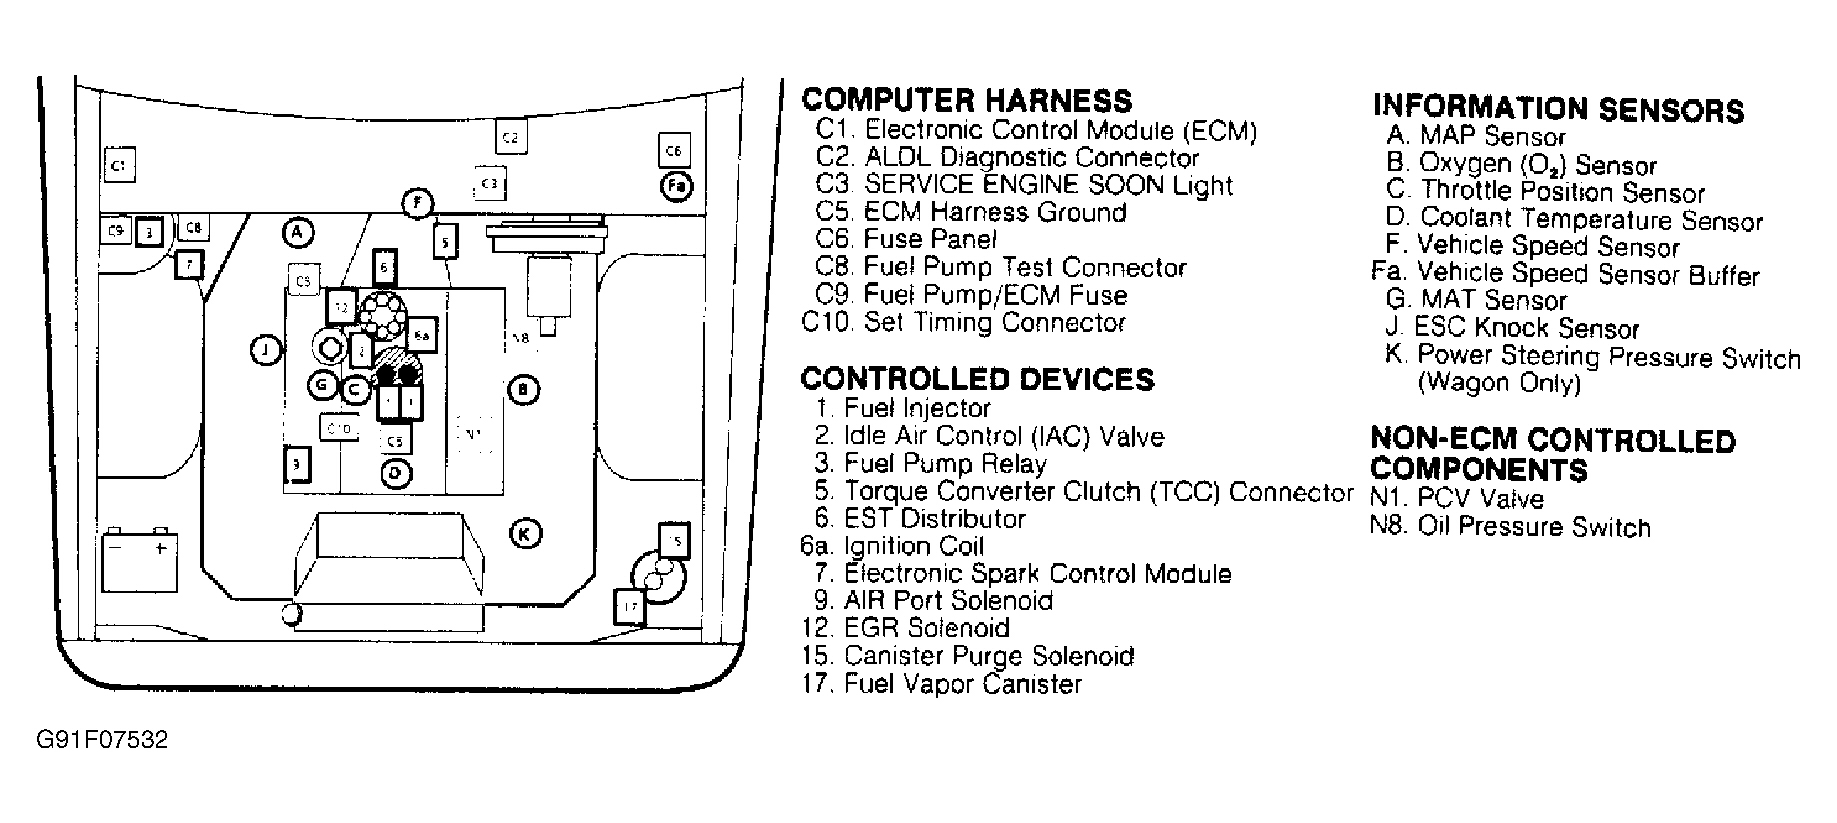 Buick Roadmaster Estate Wagon 1991 - Component Locations -  Component Locations (1 Of 3)